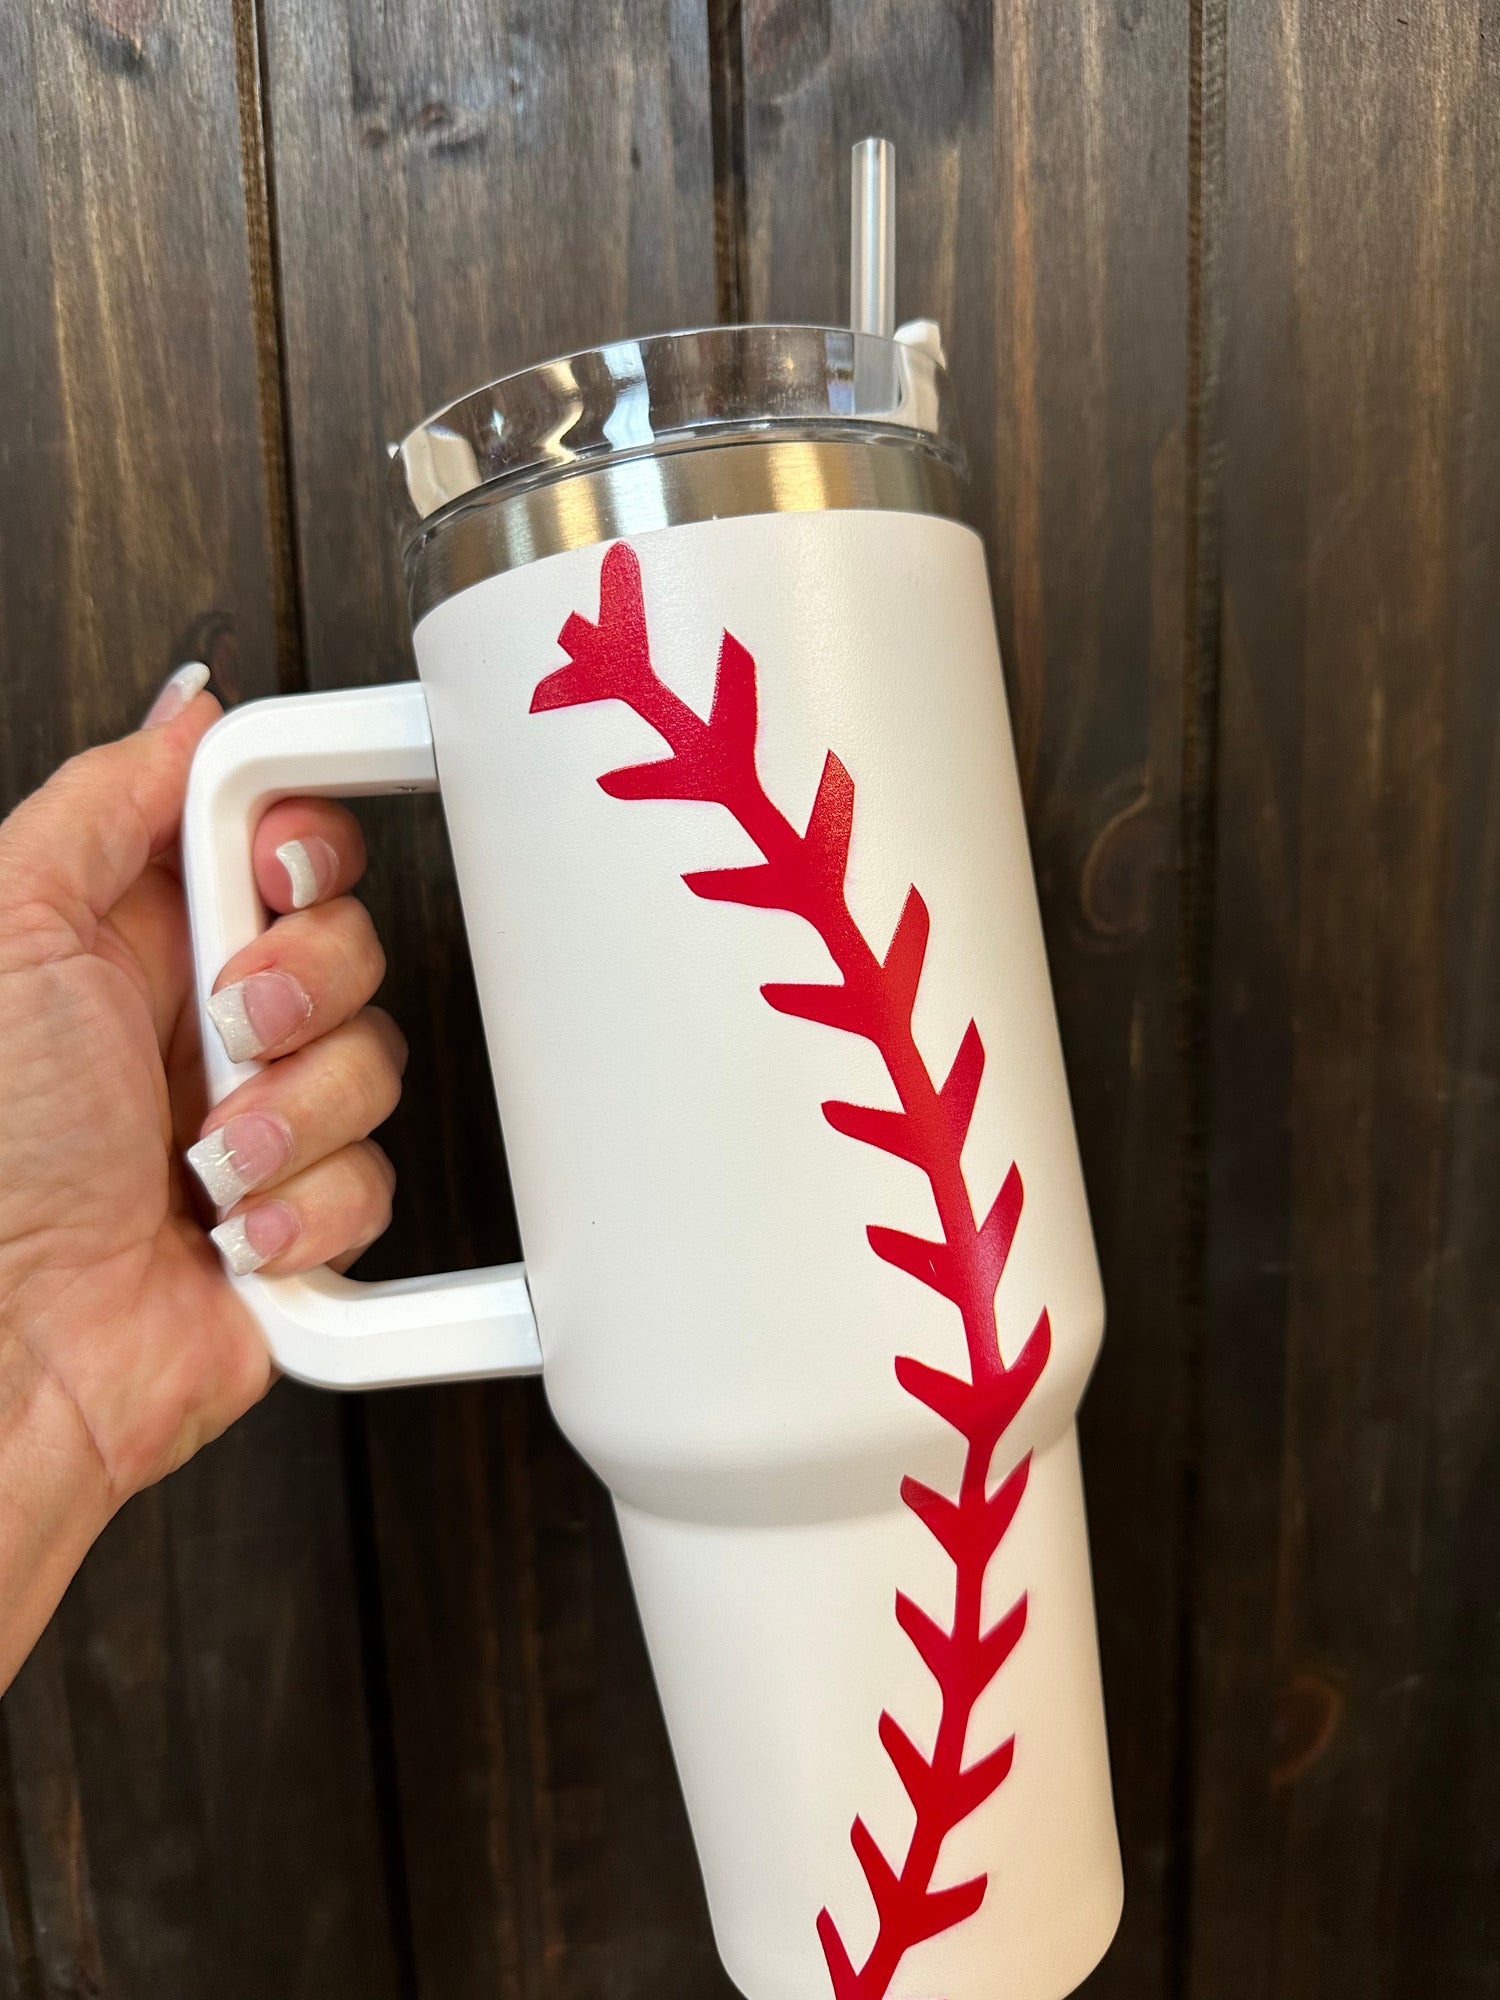 Handle Insulated Cup- White (40oz) – The Silver Strawberry